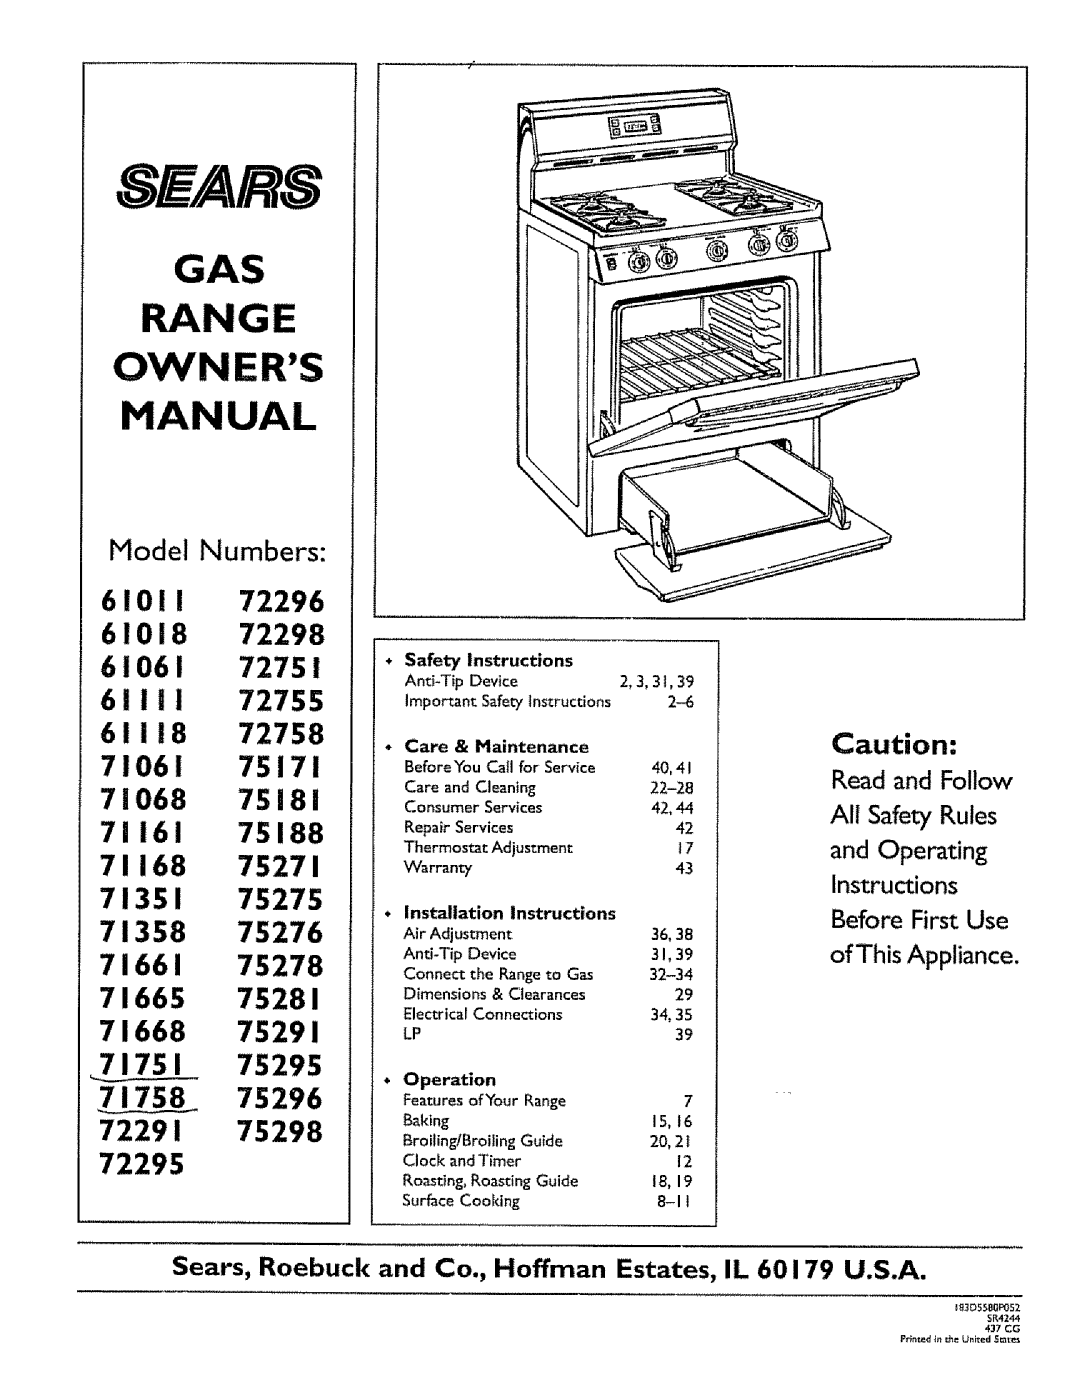 Sears 71068 owner manual Gas Range Owners Manual, Sears, Read and Follow All Safety Rules and Operating, Instructions 